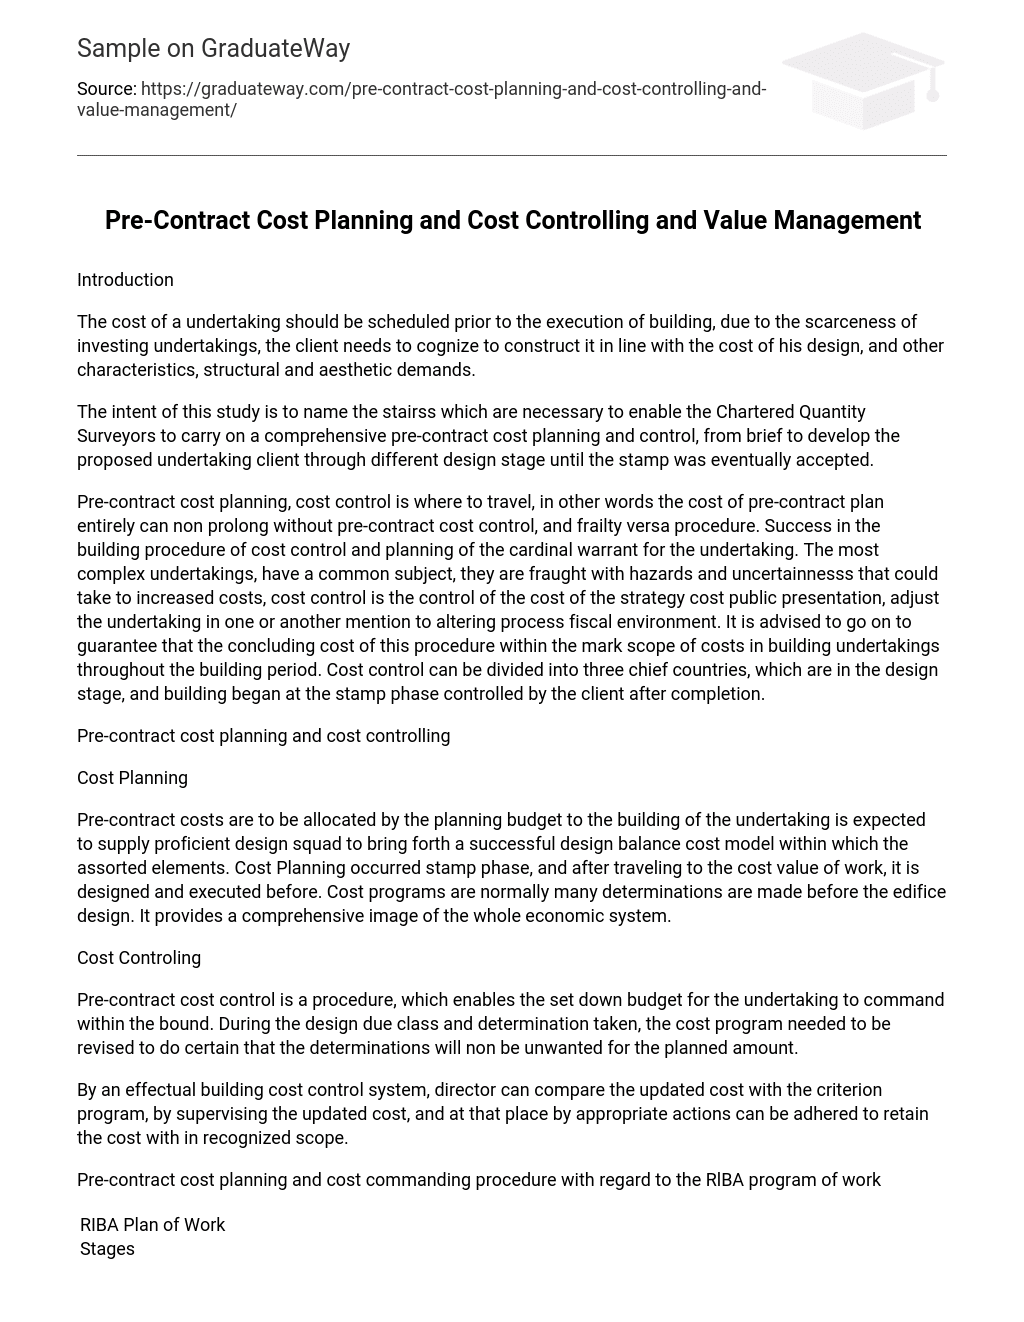 Pre-Contract Cost Planning and Cost Controlling and Value Management